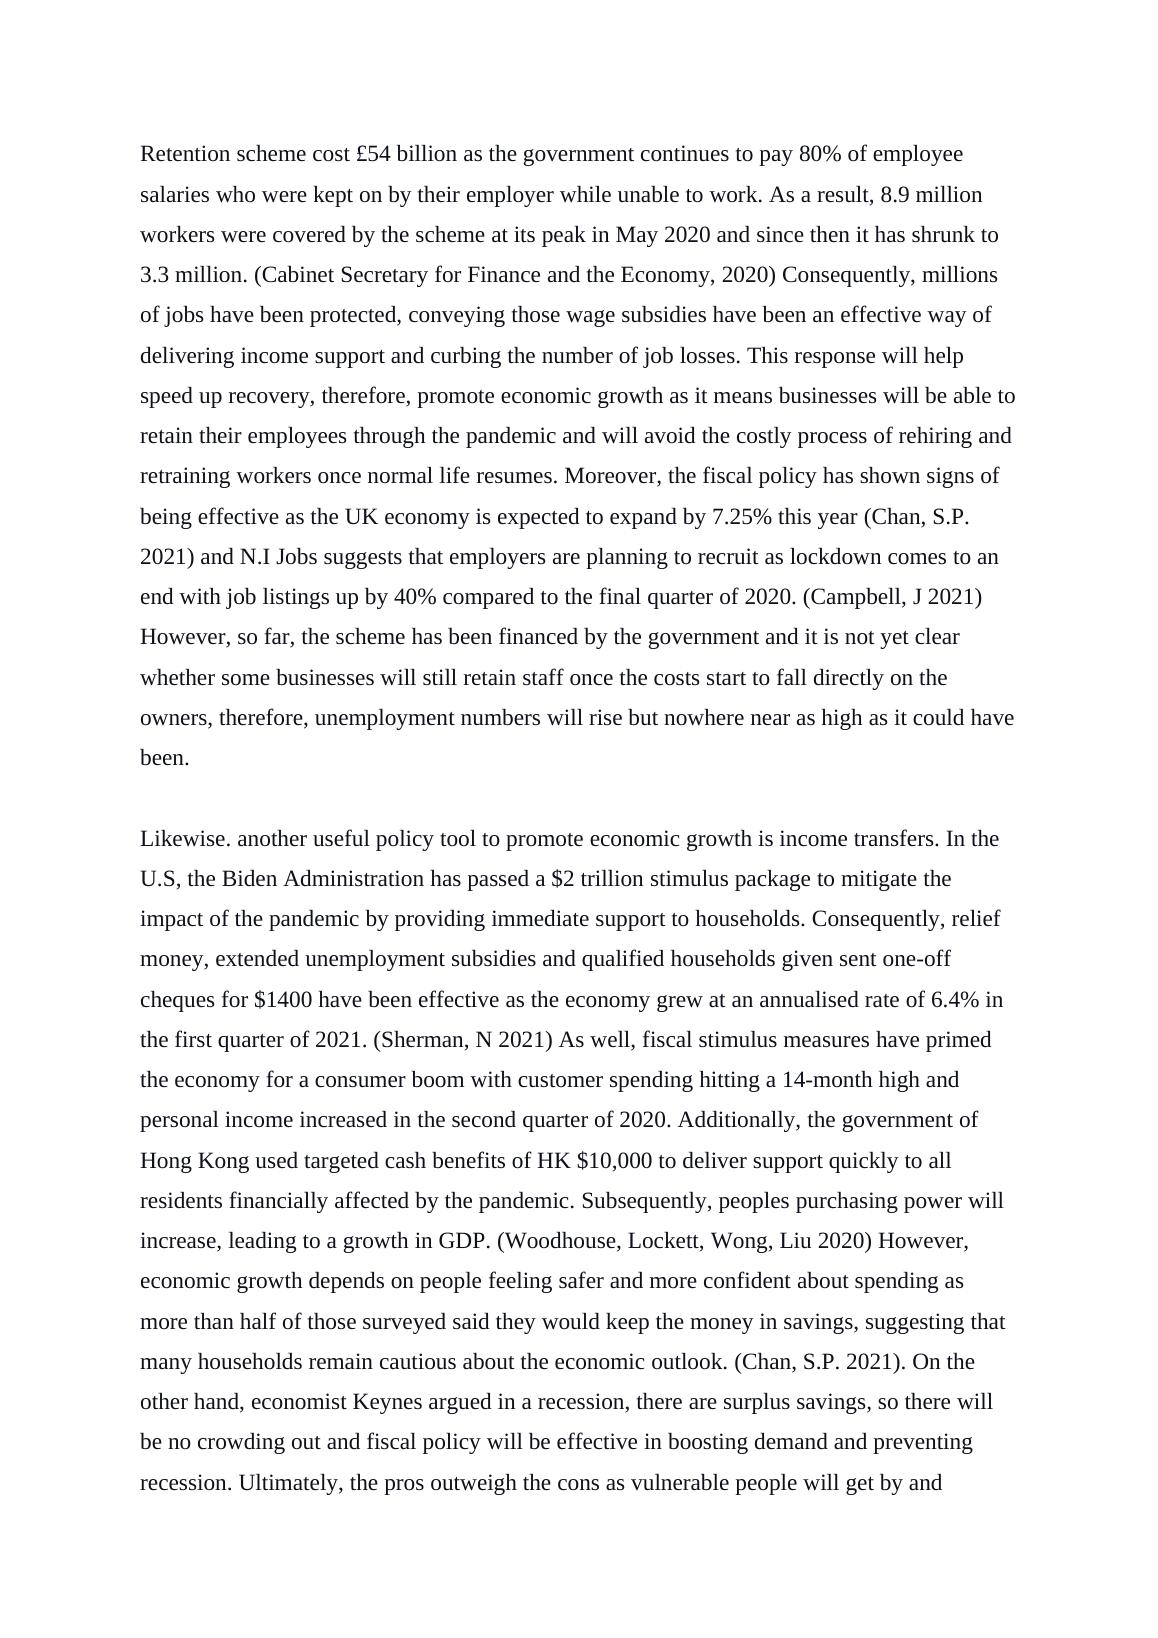 Essay on Global Impact of COVID-19 Pandemic_2